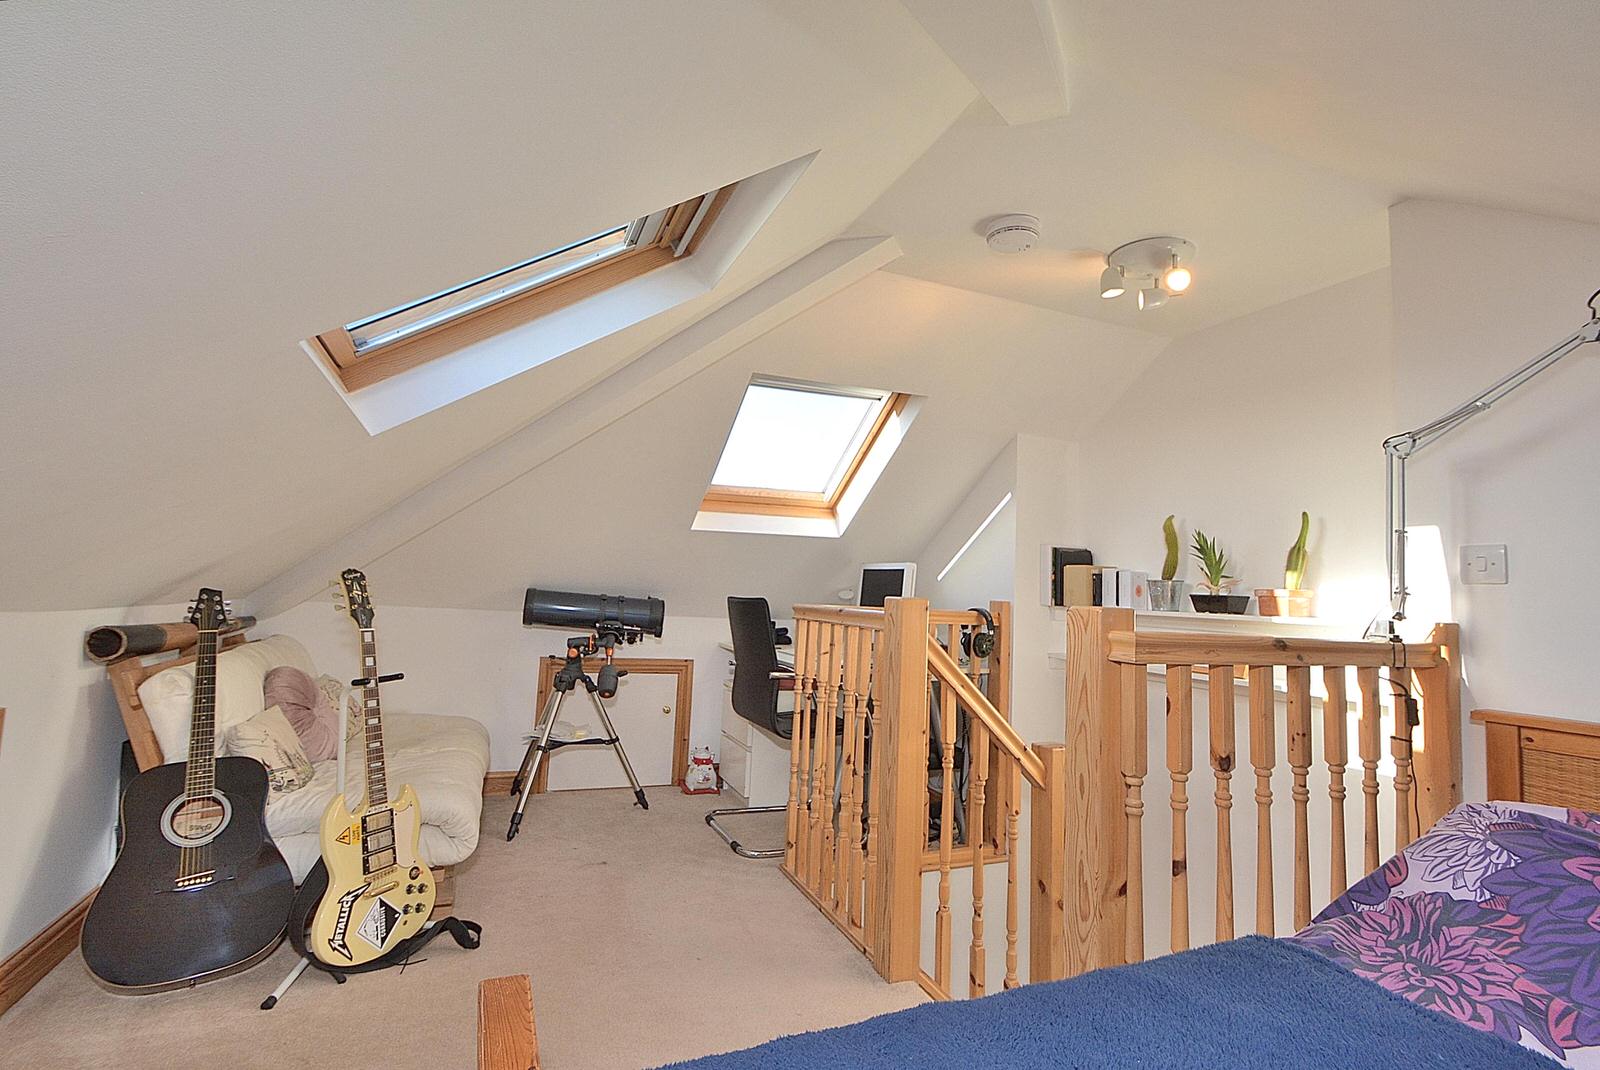 Loft Conversions What You Need To, Does Turning A Loft Into Bedroom Add Value